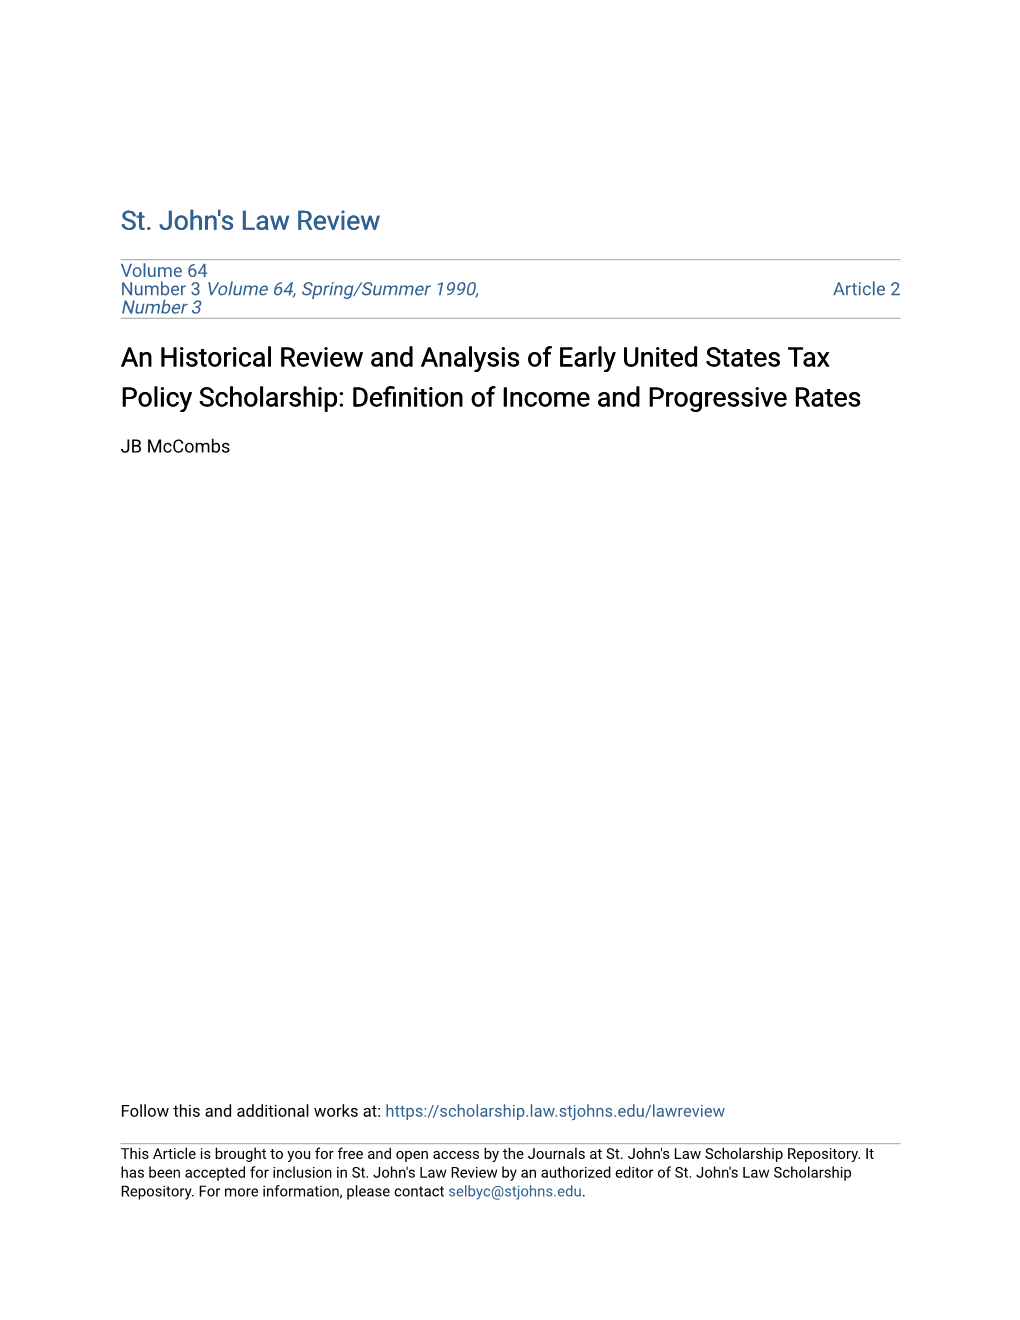 An Historical Review and Analysis of Early United States Tax Policy Scholarship: Definition of Income and Progressive Rates